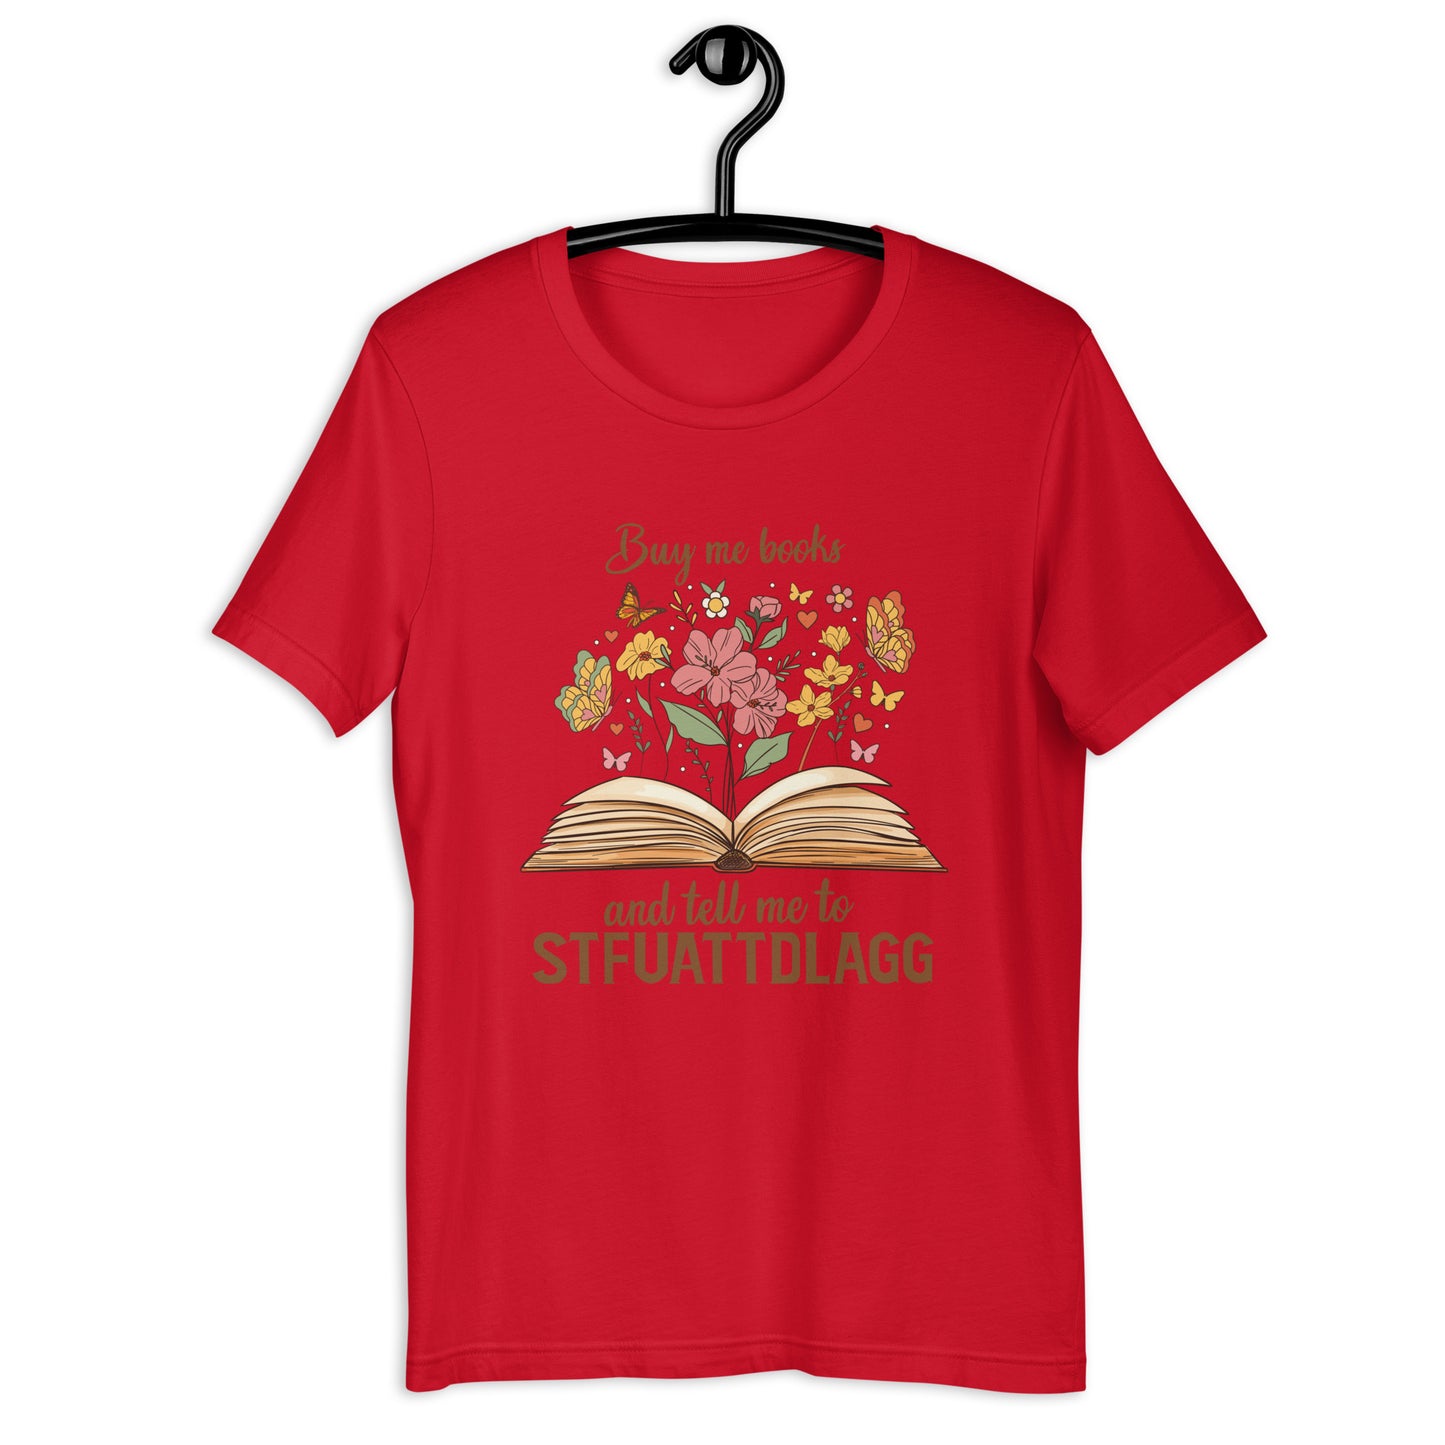 Buy Me Books and Tell ME to STFUATTDLAGG Unisex t-shirt